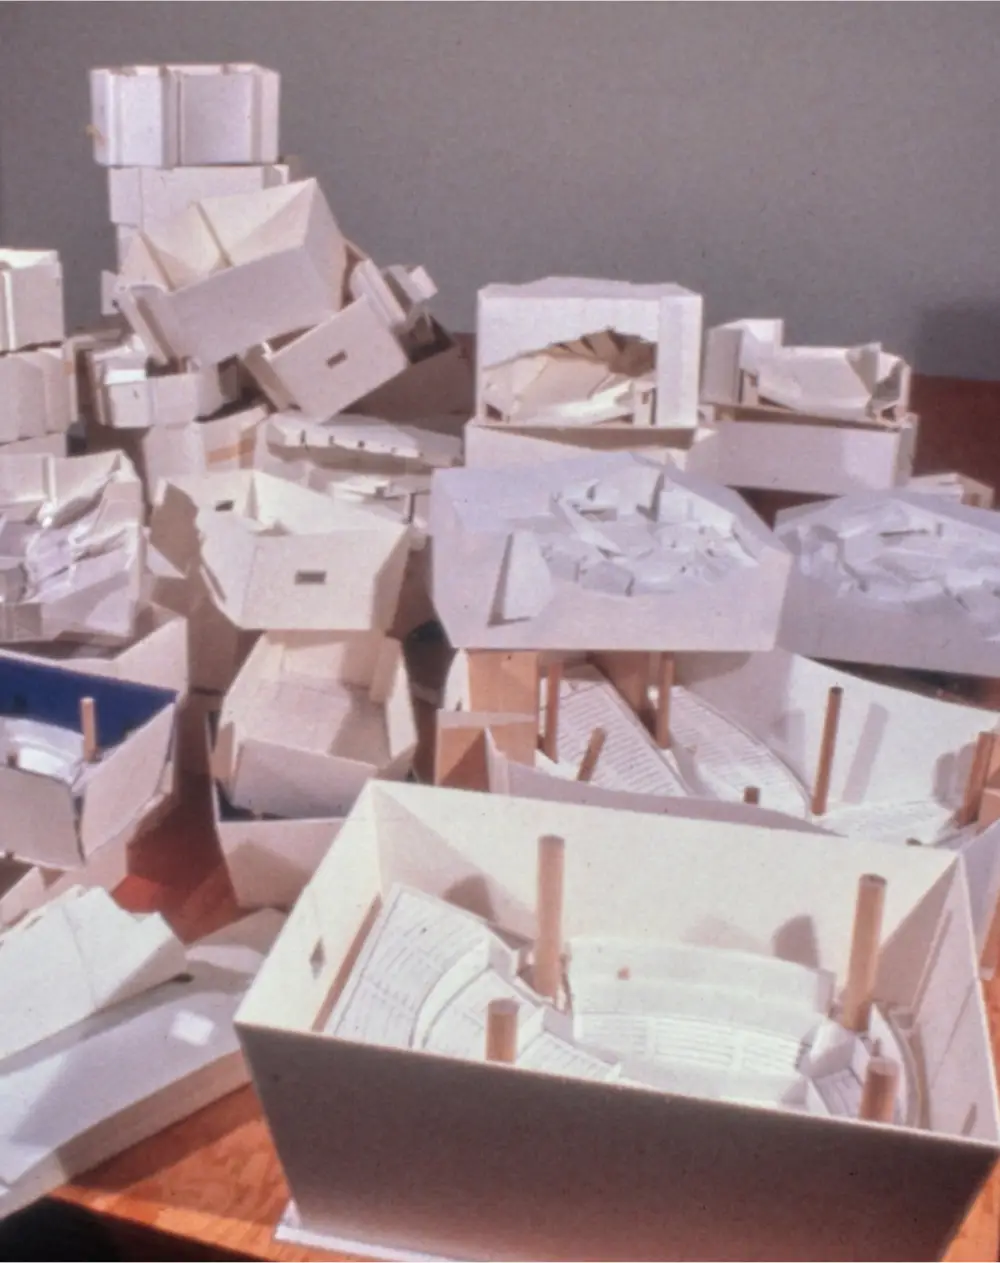 Models in paper and wood accumulate on a desk, piled atop one another.